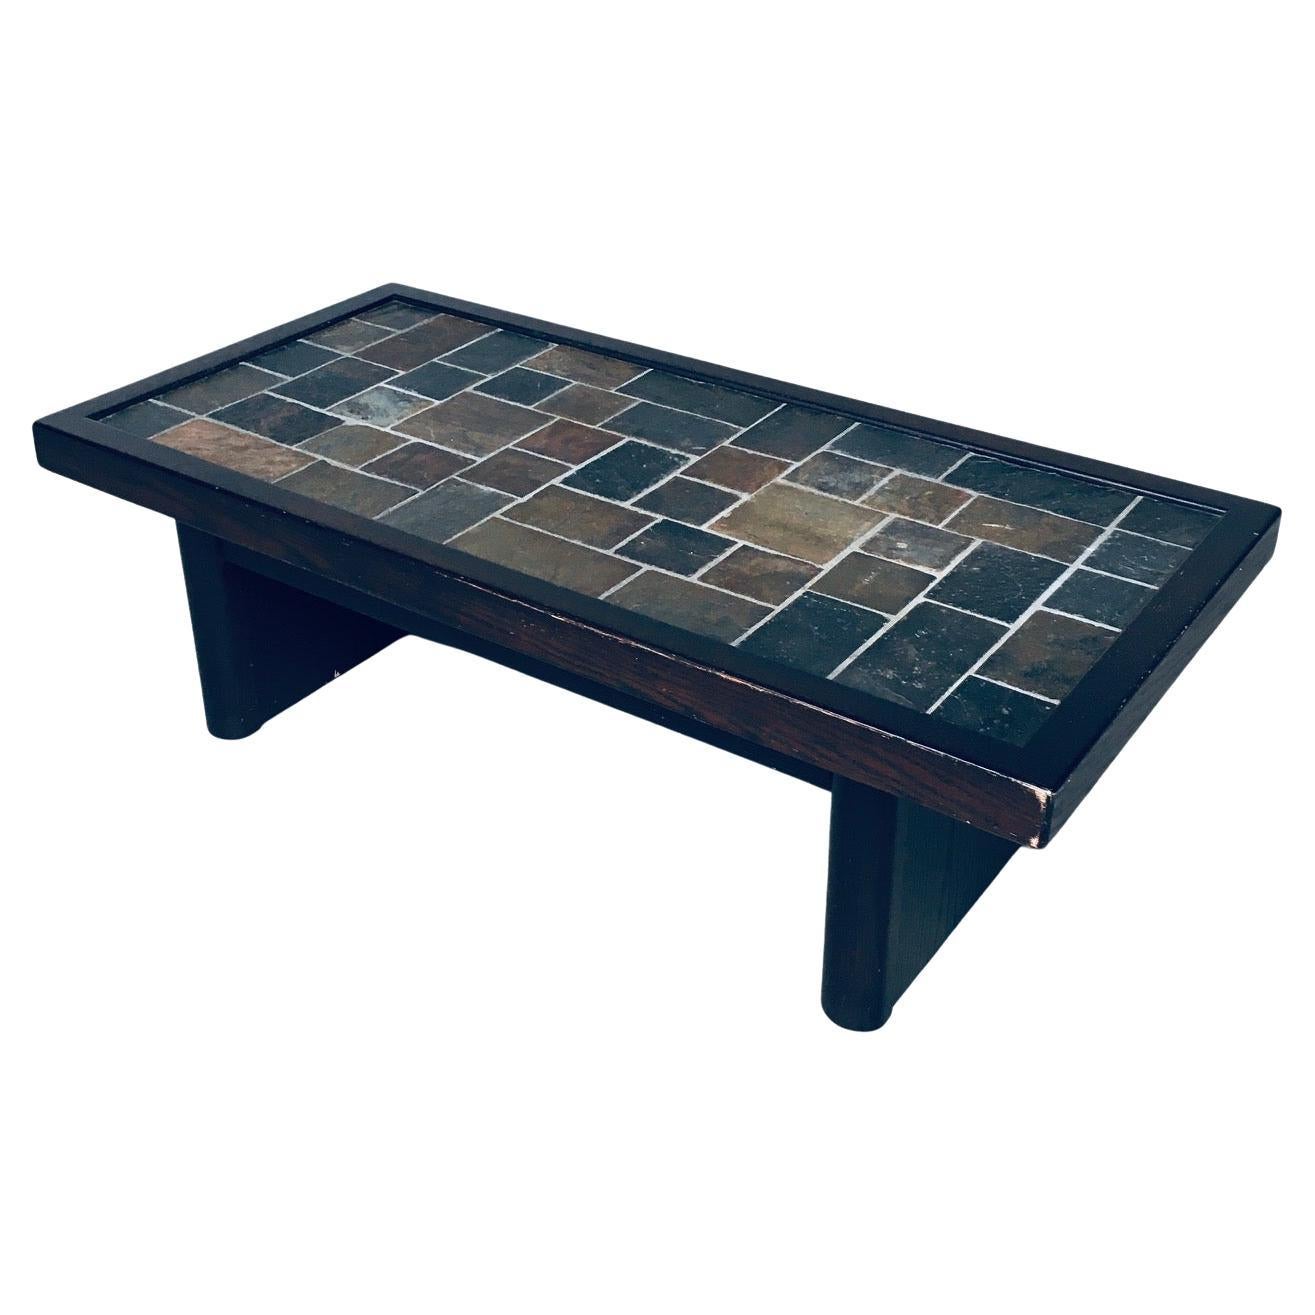 Brutalist Design in Style Slate Tile Inlay Coffee Table, Belgium 1970's